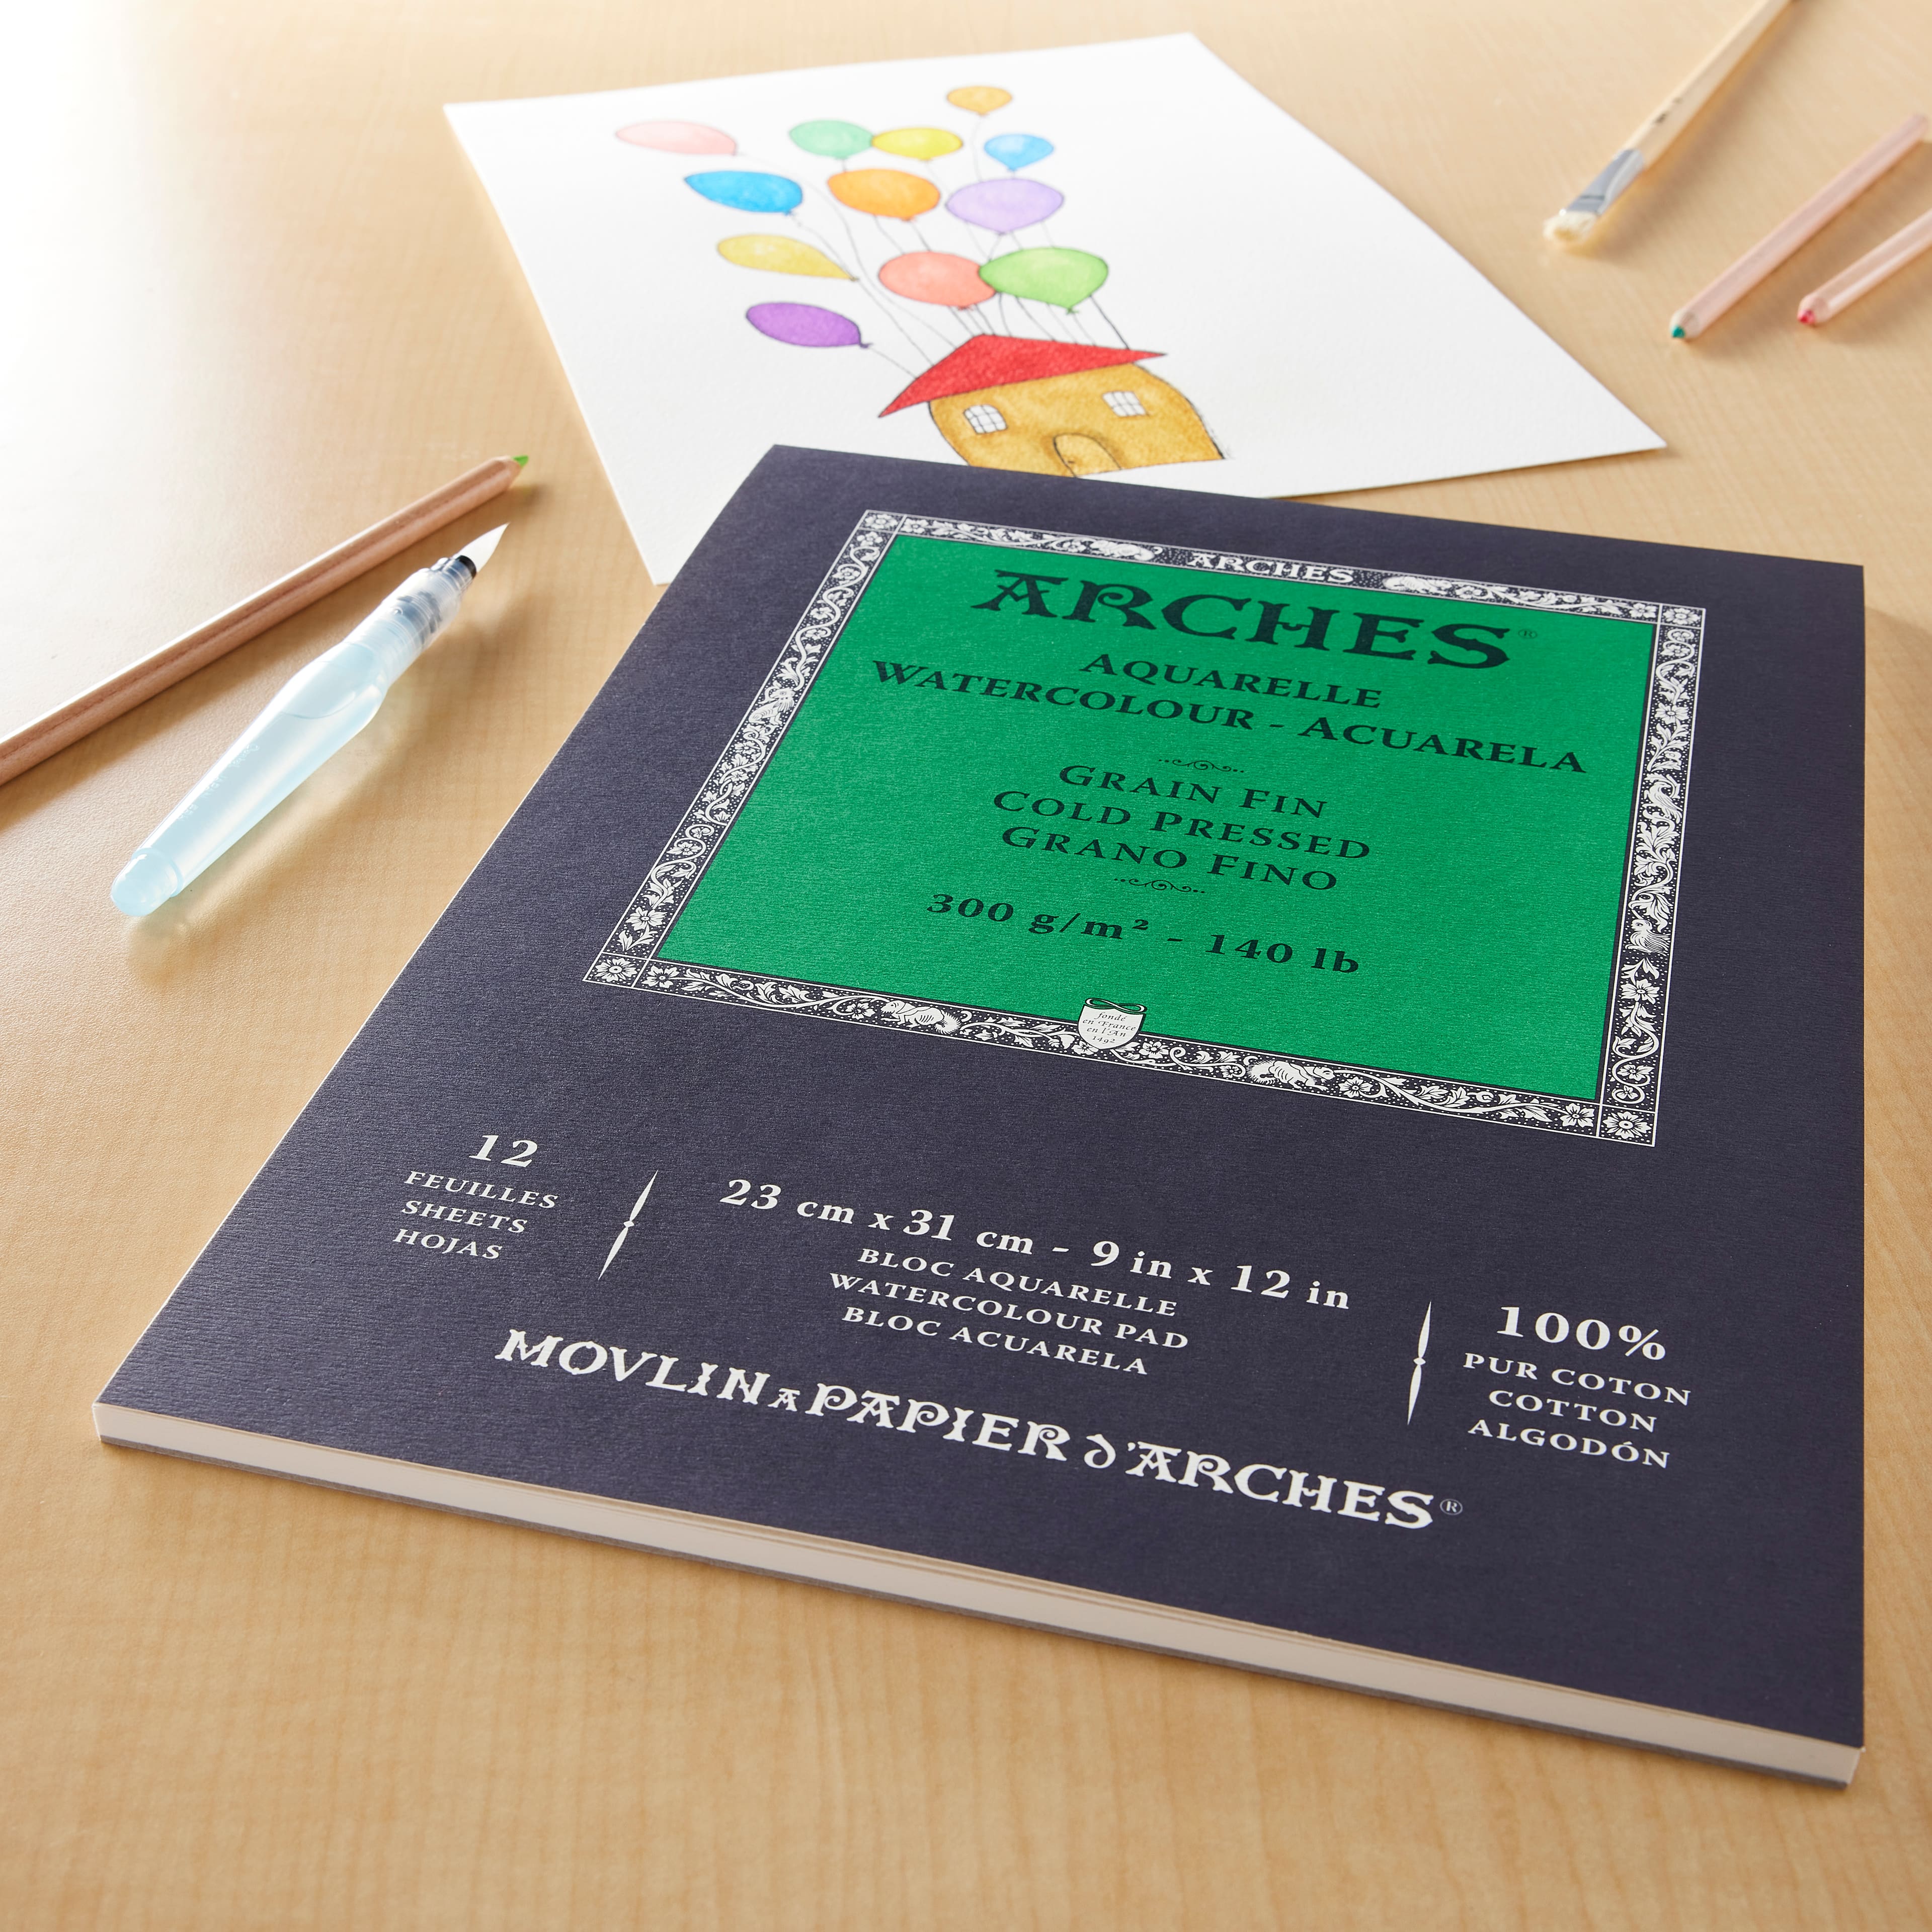 Arches&#xAE; Cold-Pressed Watercolor Pad